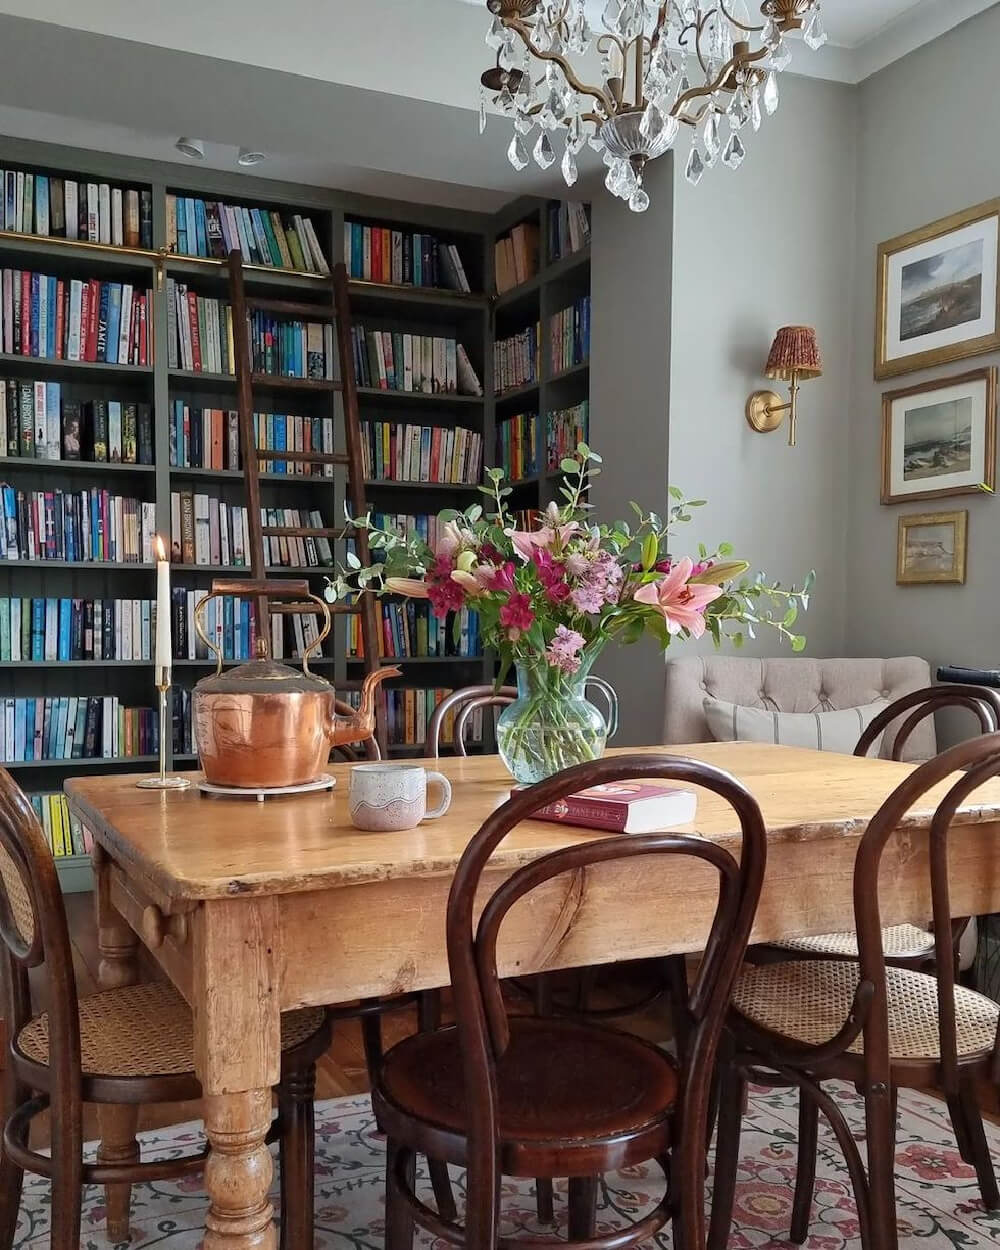 In The Love Of Home Files #2, this is a cozy home library with a table and chair.